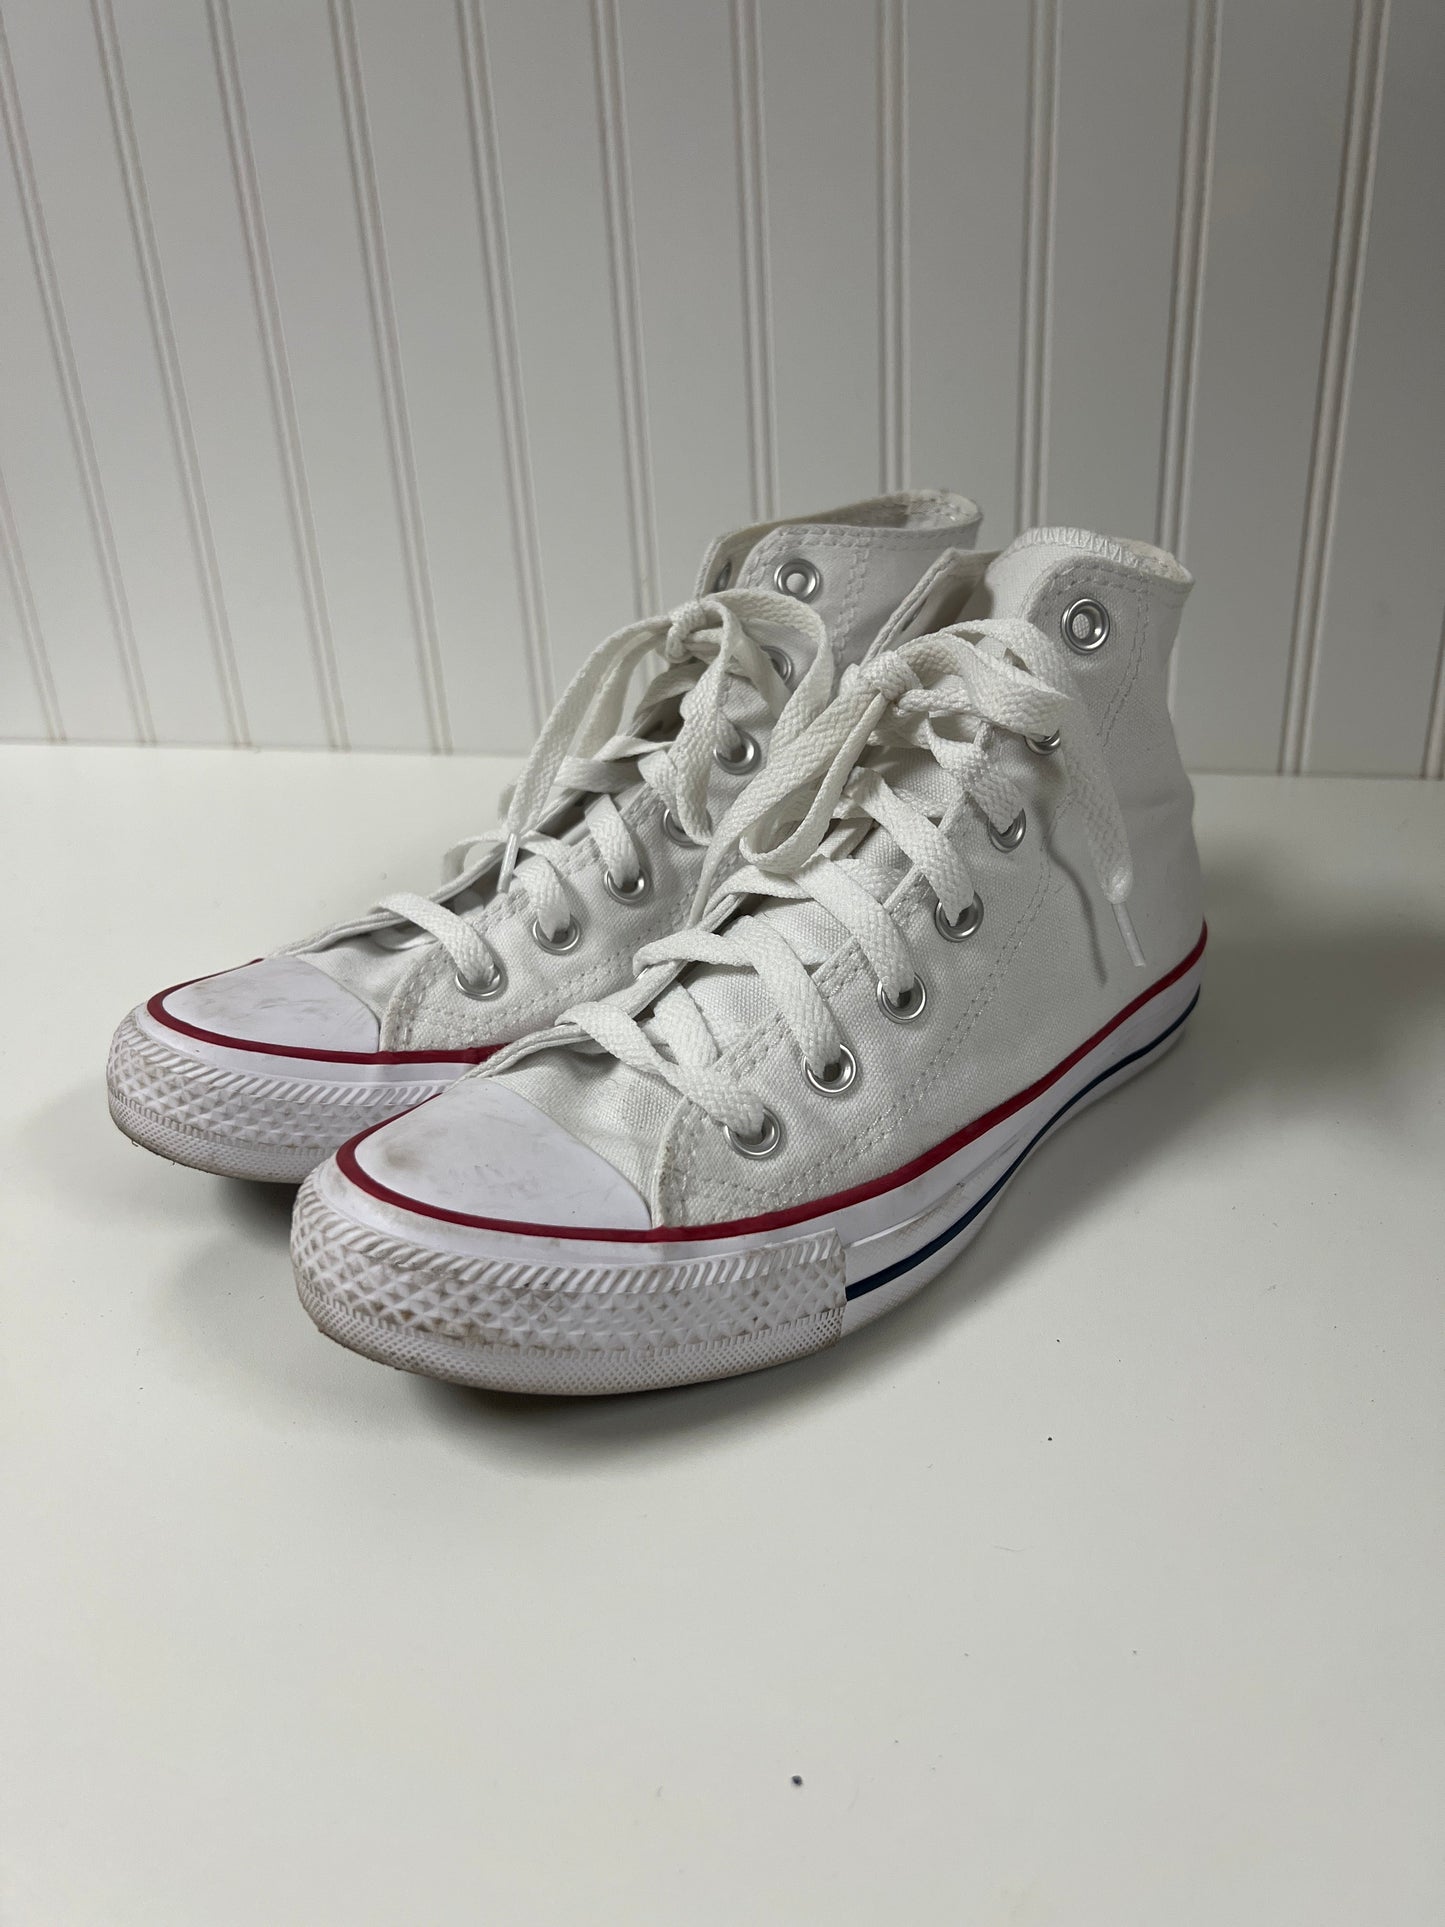 White Shoes Sneakers Converse, Size 6.5